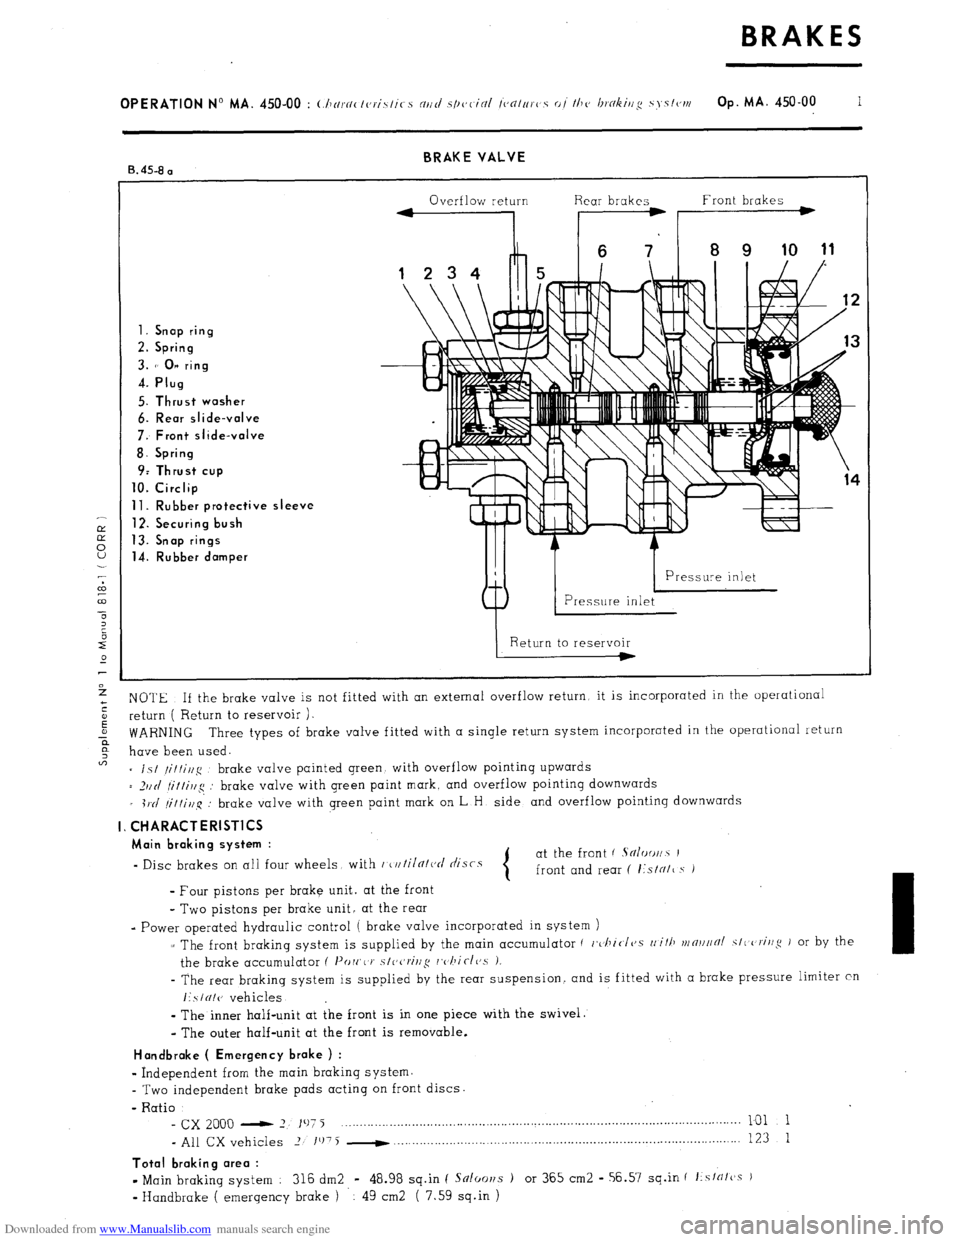 Citroen CX 1985 1.G User Guide Downloaded from www.Manualslib.com manuals search engine BRAKE VALVE 
B. 45-8 a 
Overflow return Rear brakes Front brakes 
1. Snap ring 
2. Spring 
3. 1’ 0” ring 
4. Plug 
5. Thrust washer 
6. Rea